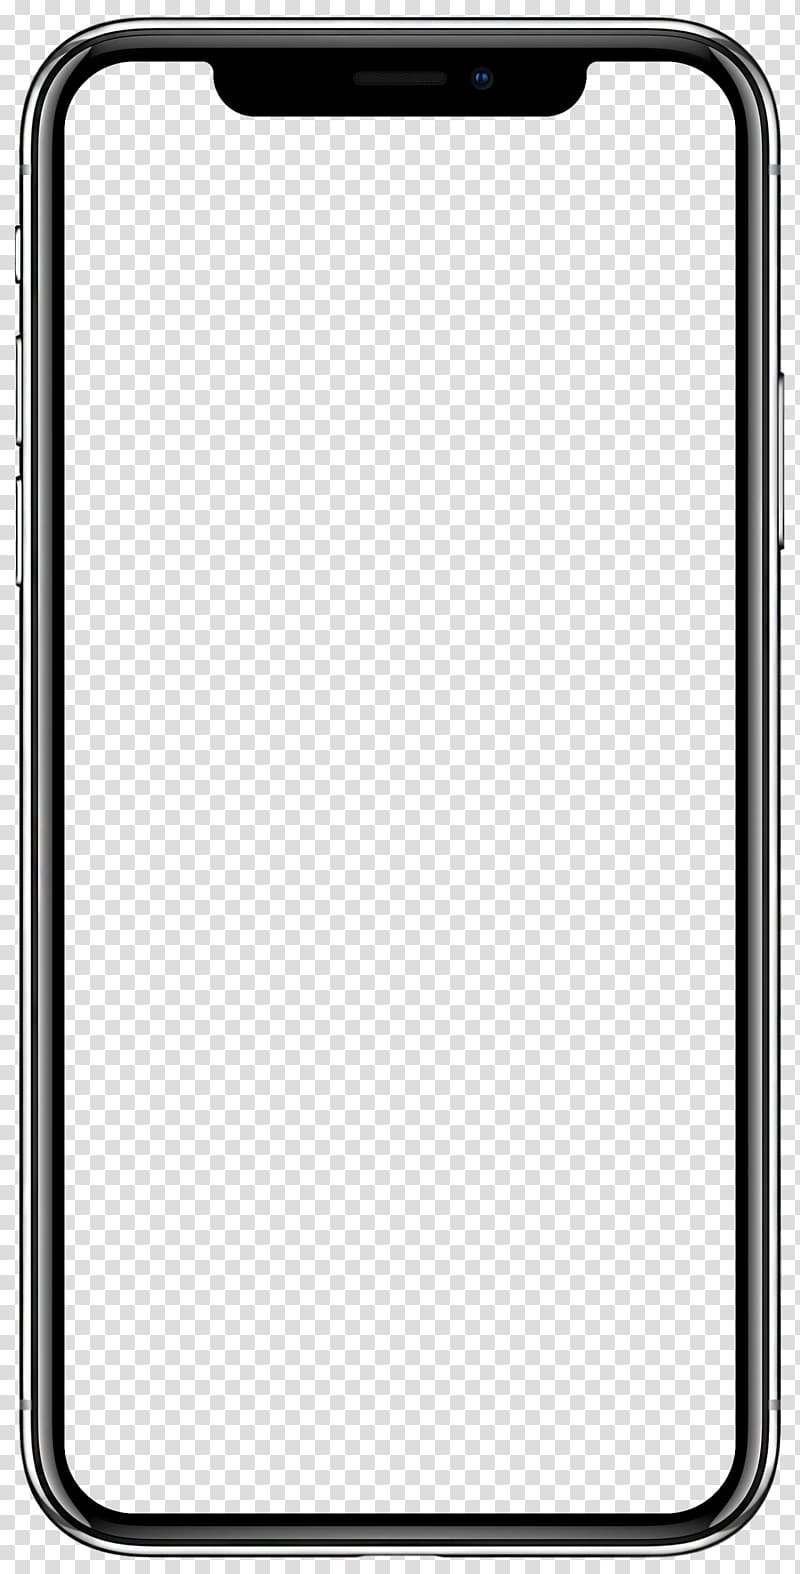 iPhone frame illustration, iPhone X App Store Apple iOS 11, apple transparent background PNG clipart